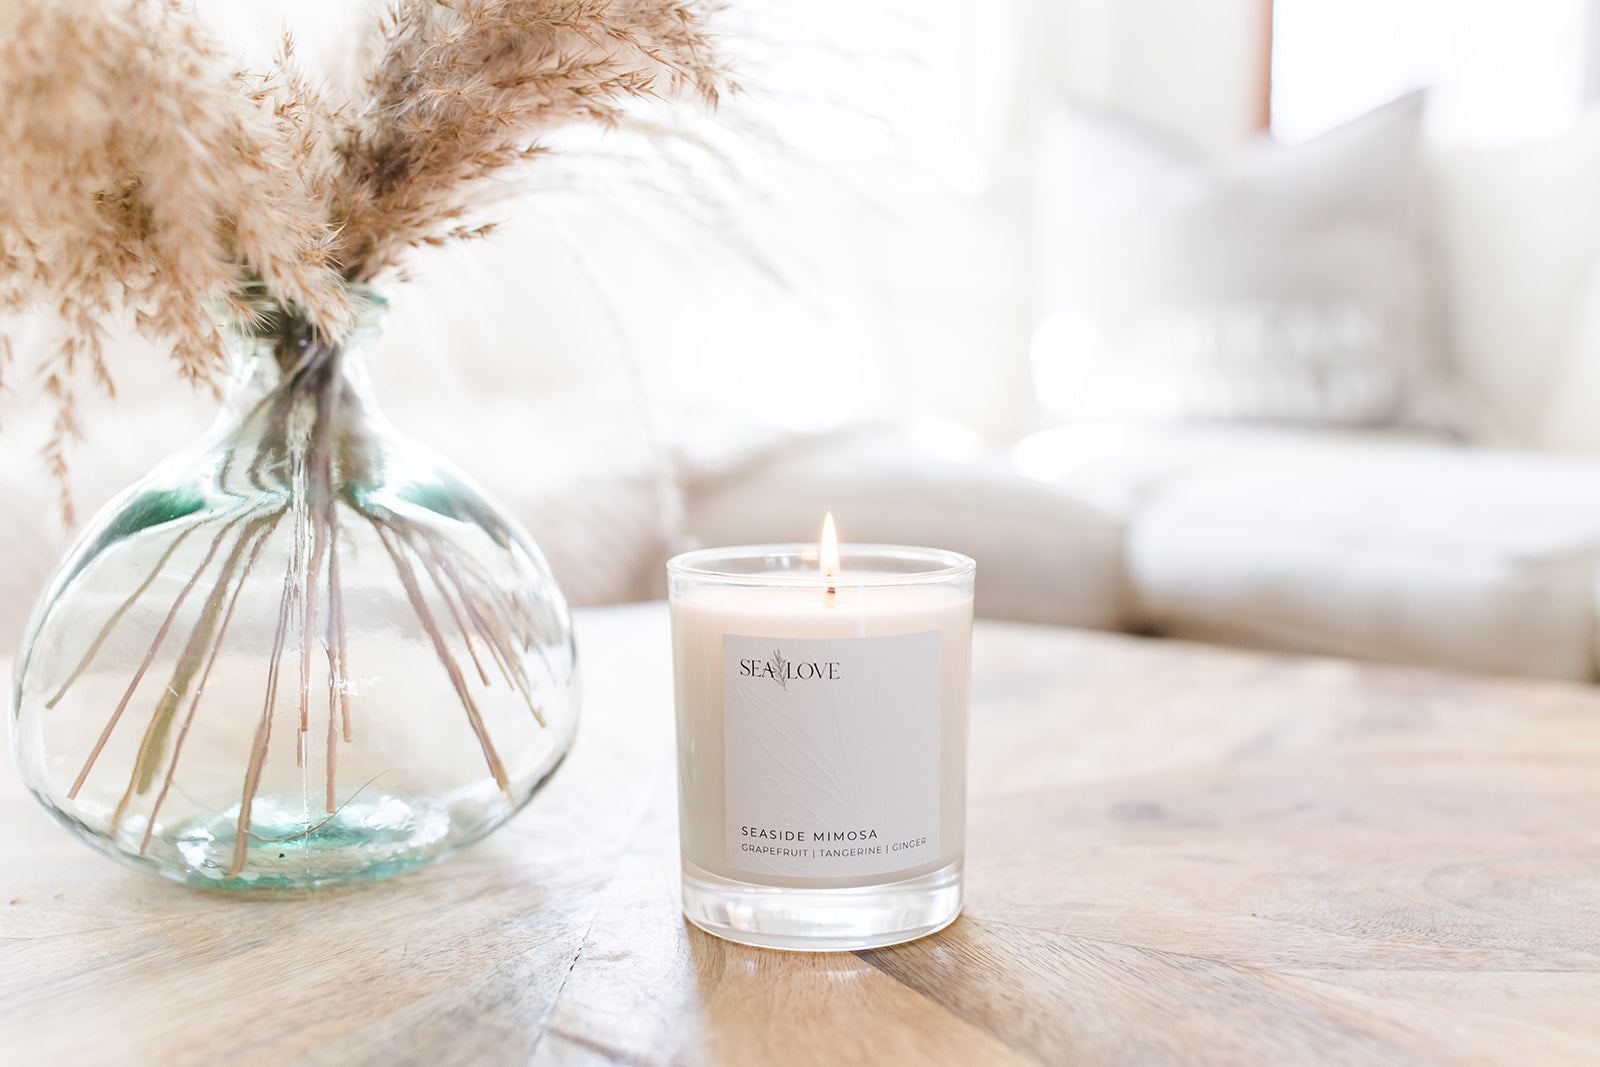 A serene setting with a lit scented candle named 'seaside mimosa' on a wooden table, accompanied by a vase of delicate pampas grass, conveying a warm and tranquil atmosphere.